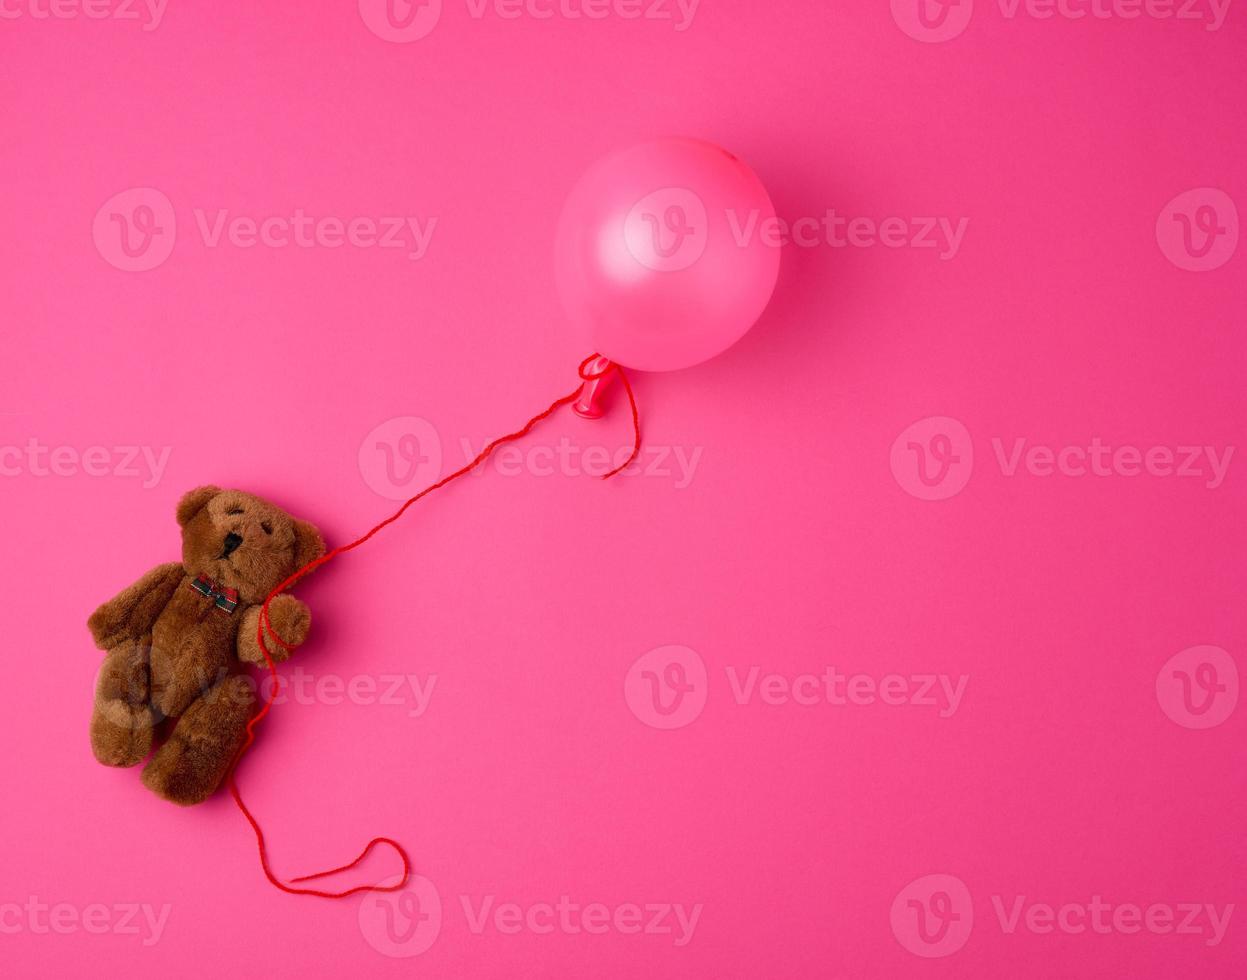 little brown teddy bear holding a pink inflated balloon on a rope photo